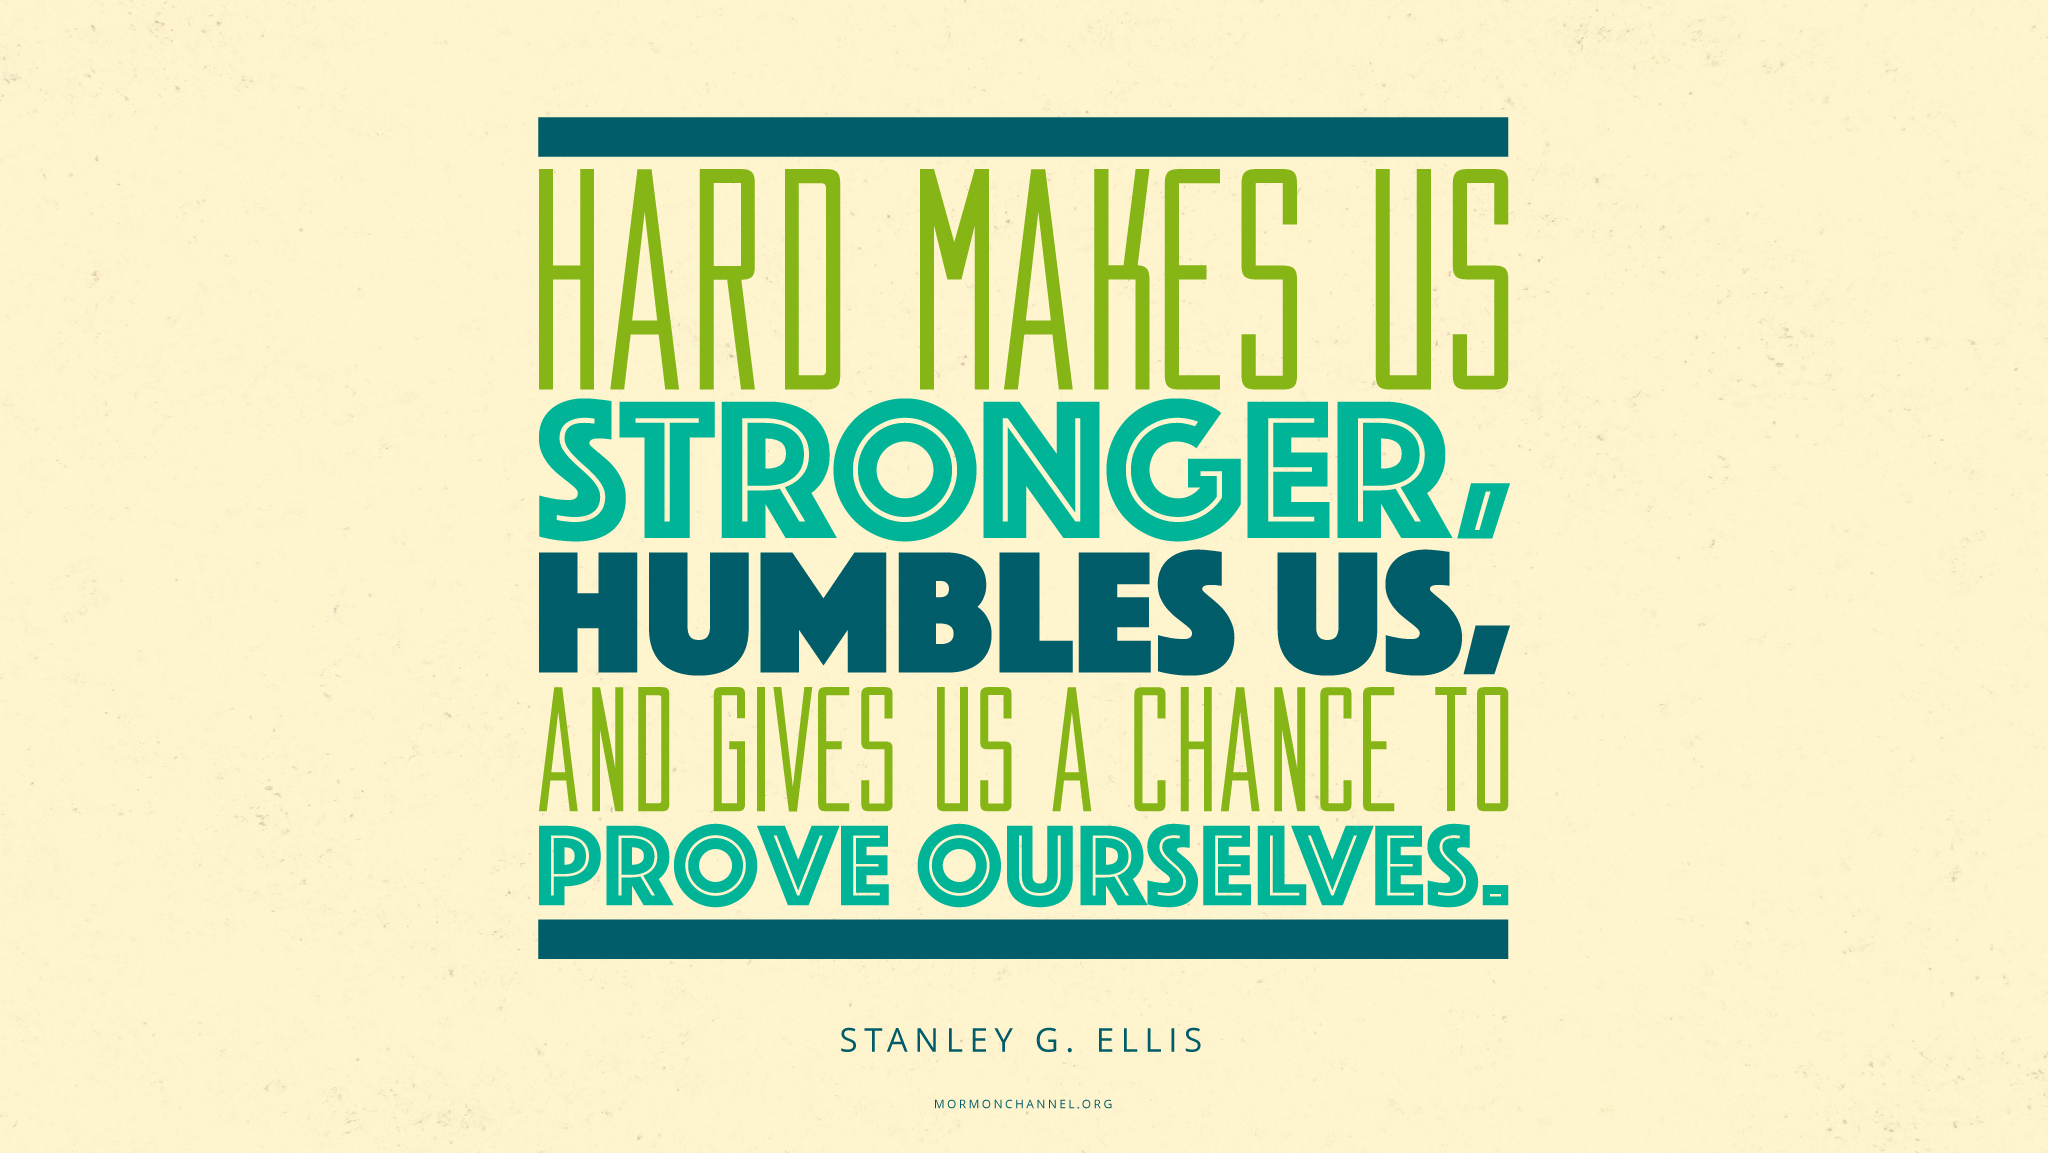 daily-quote-challenges-make-us-stronger-mormon-channel